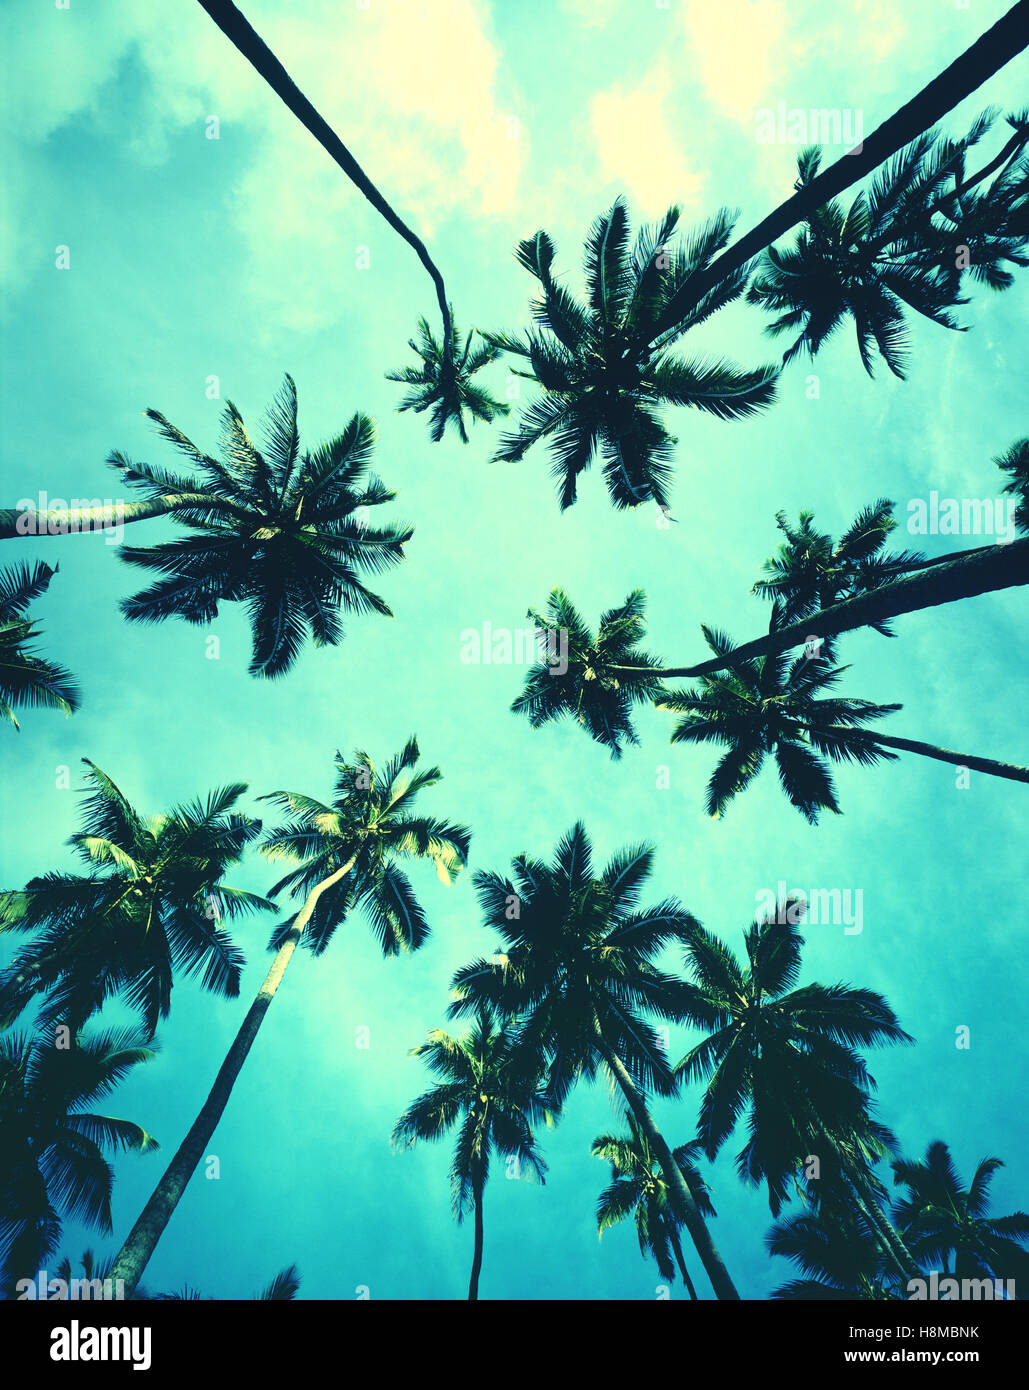 Palm Trees with blue filter Stock Photo